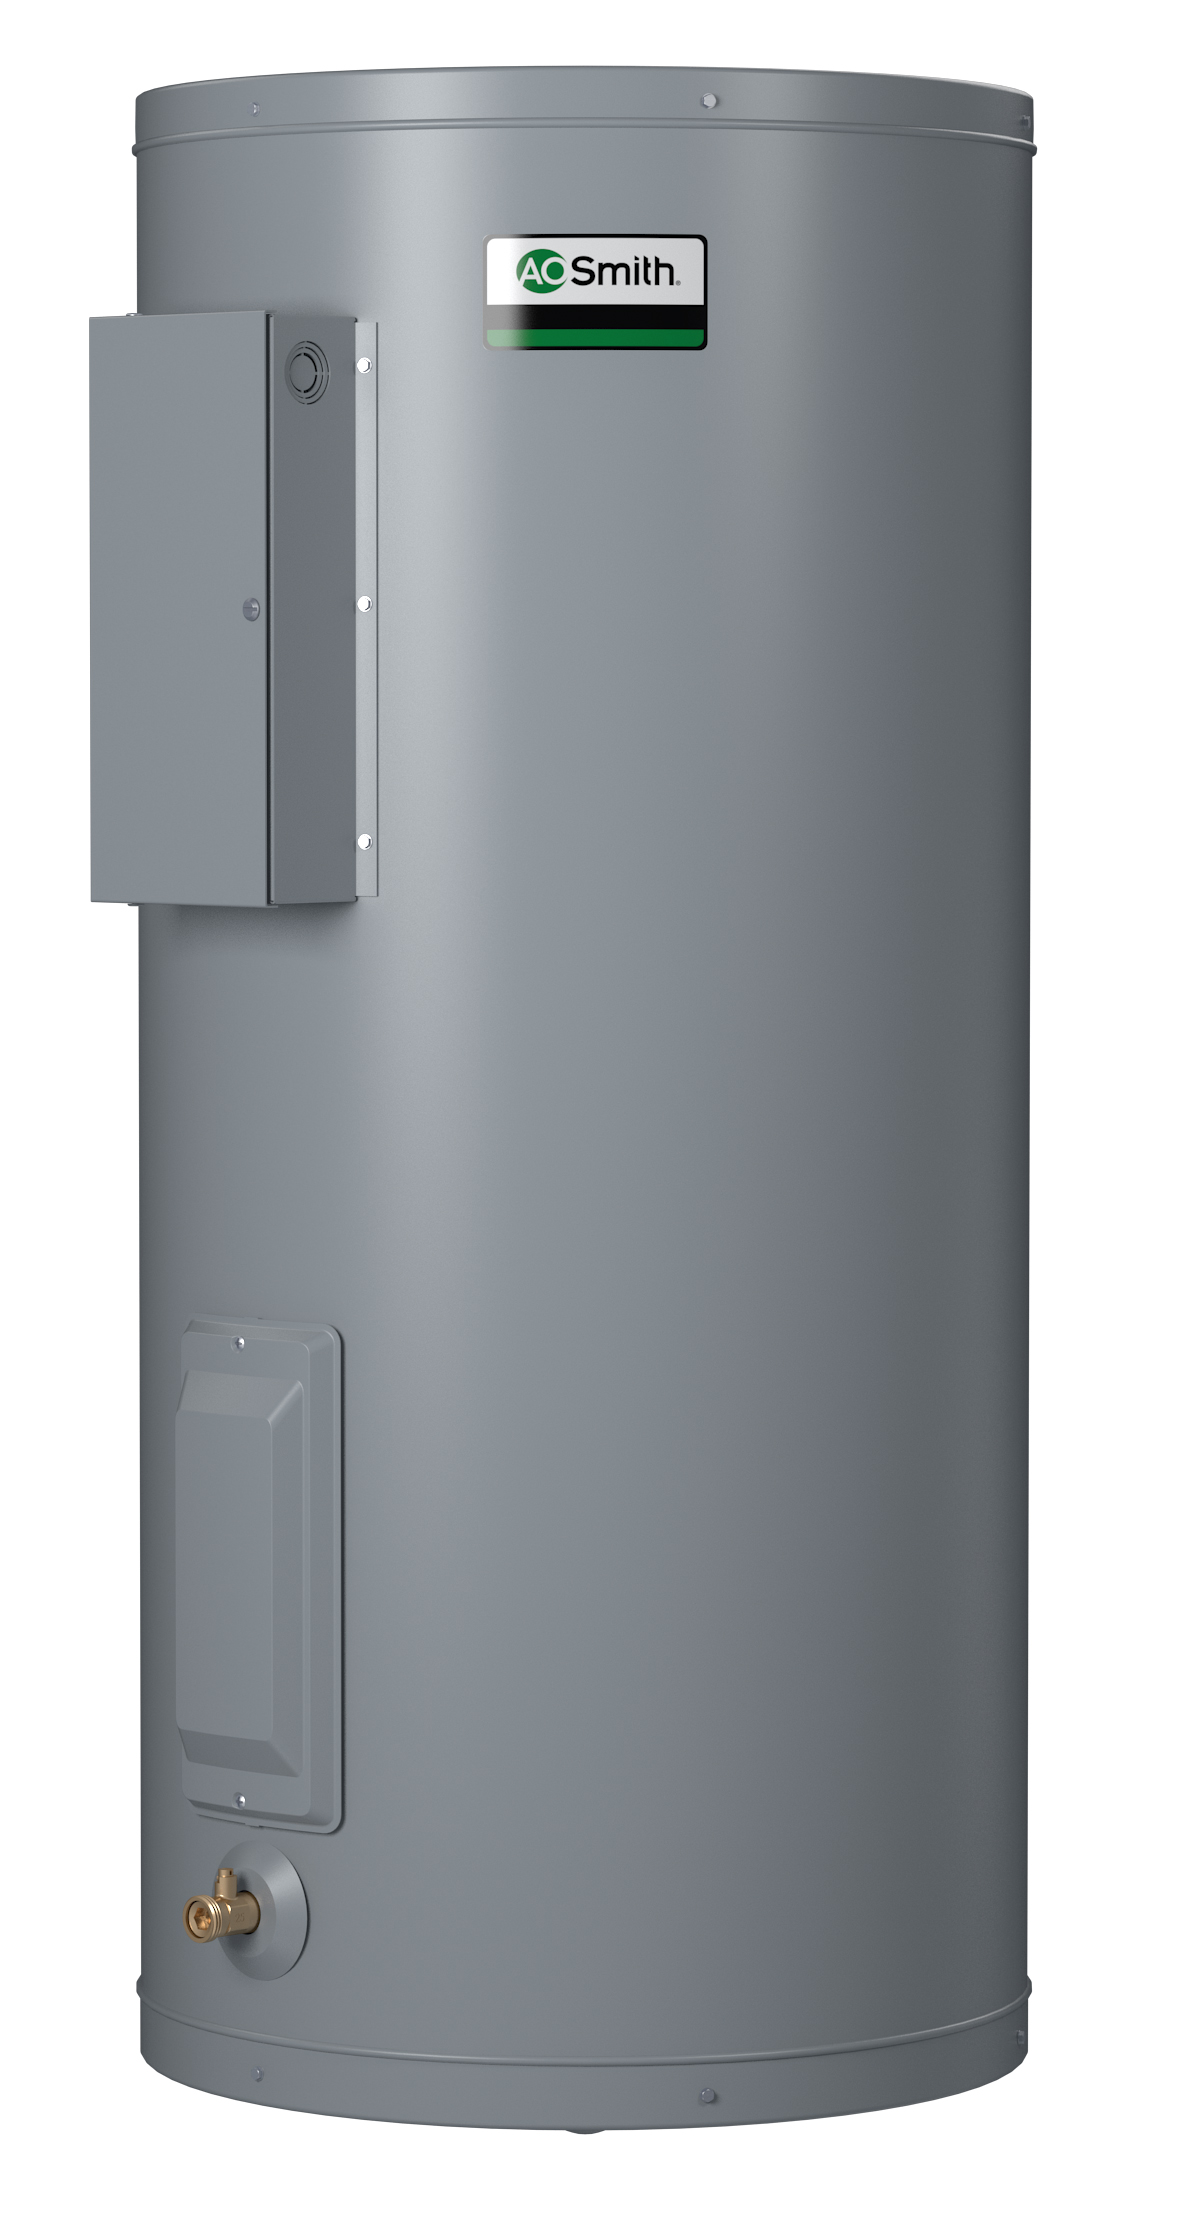 AO SMITH DEL-10S: 10 GALLONS, 6.0KW, 240 VOLT, 25 AMPS, 1 PHASE, SINGLE ELEMENT, LIGHT DUTY COMMERCIAL ELECTRIC WATER HEATER, DURA-POWER